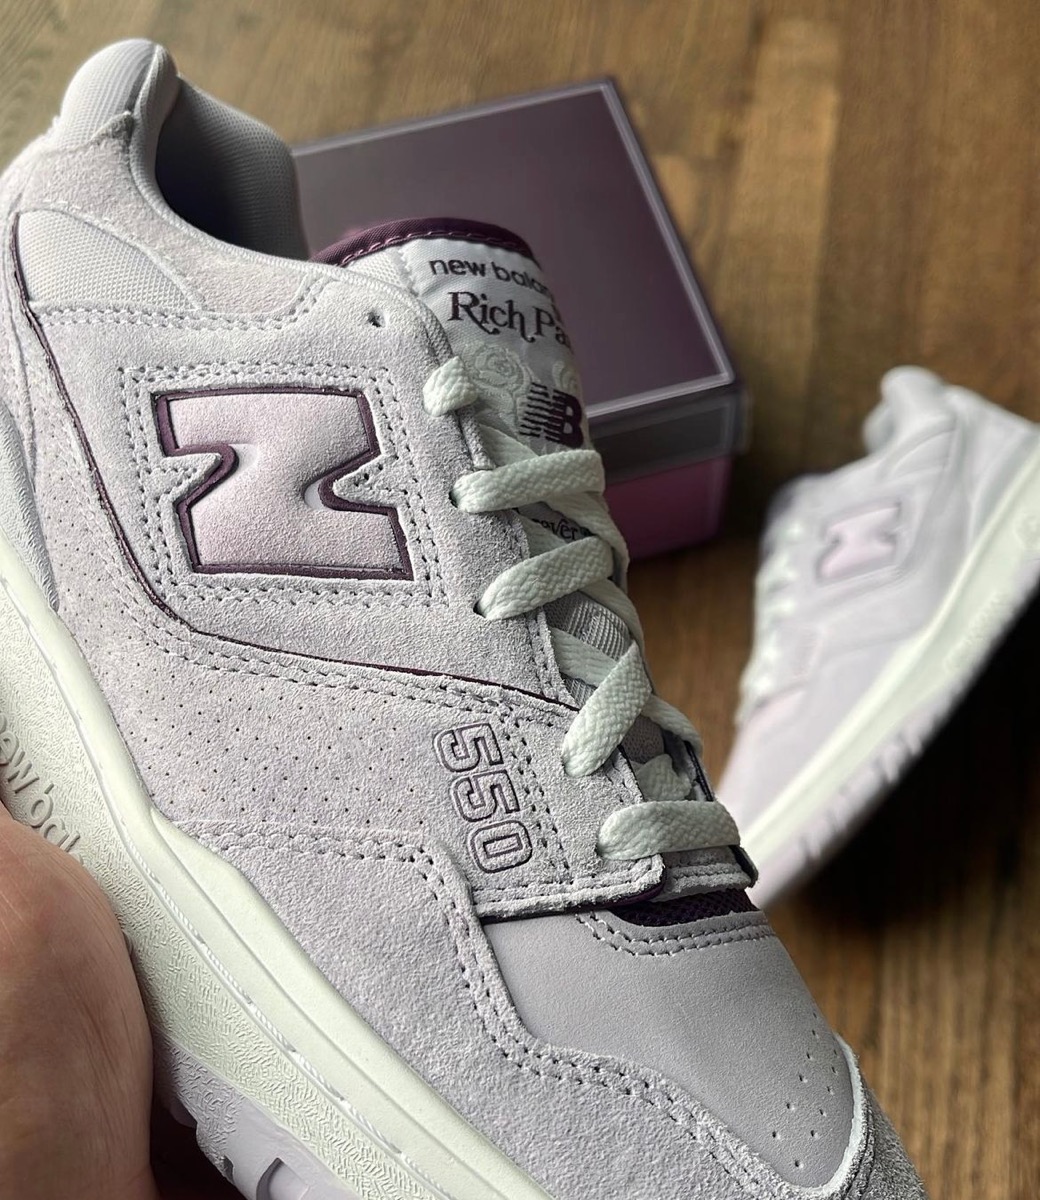 Rich Paul New Balance 550 Forever Yours Release Date